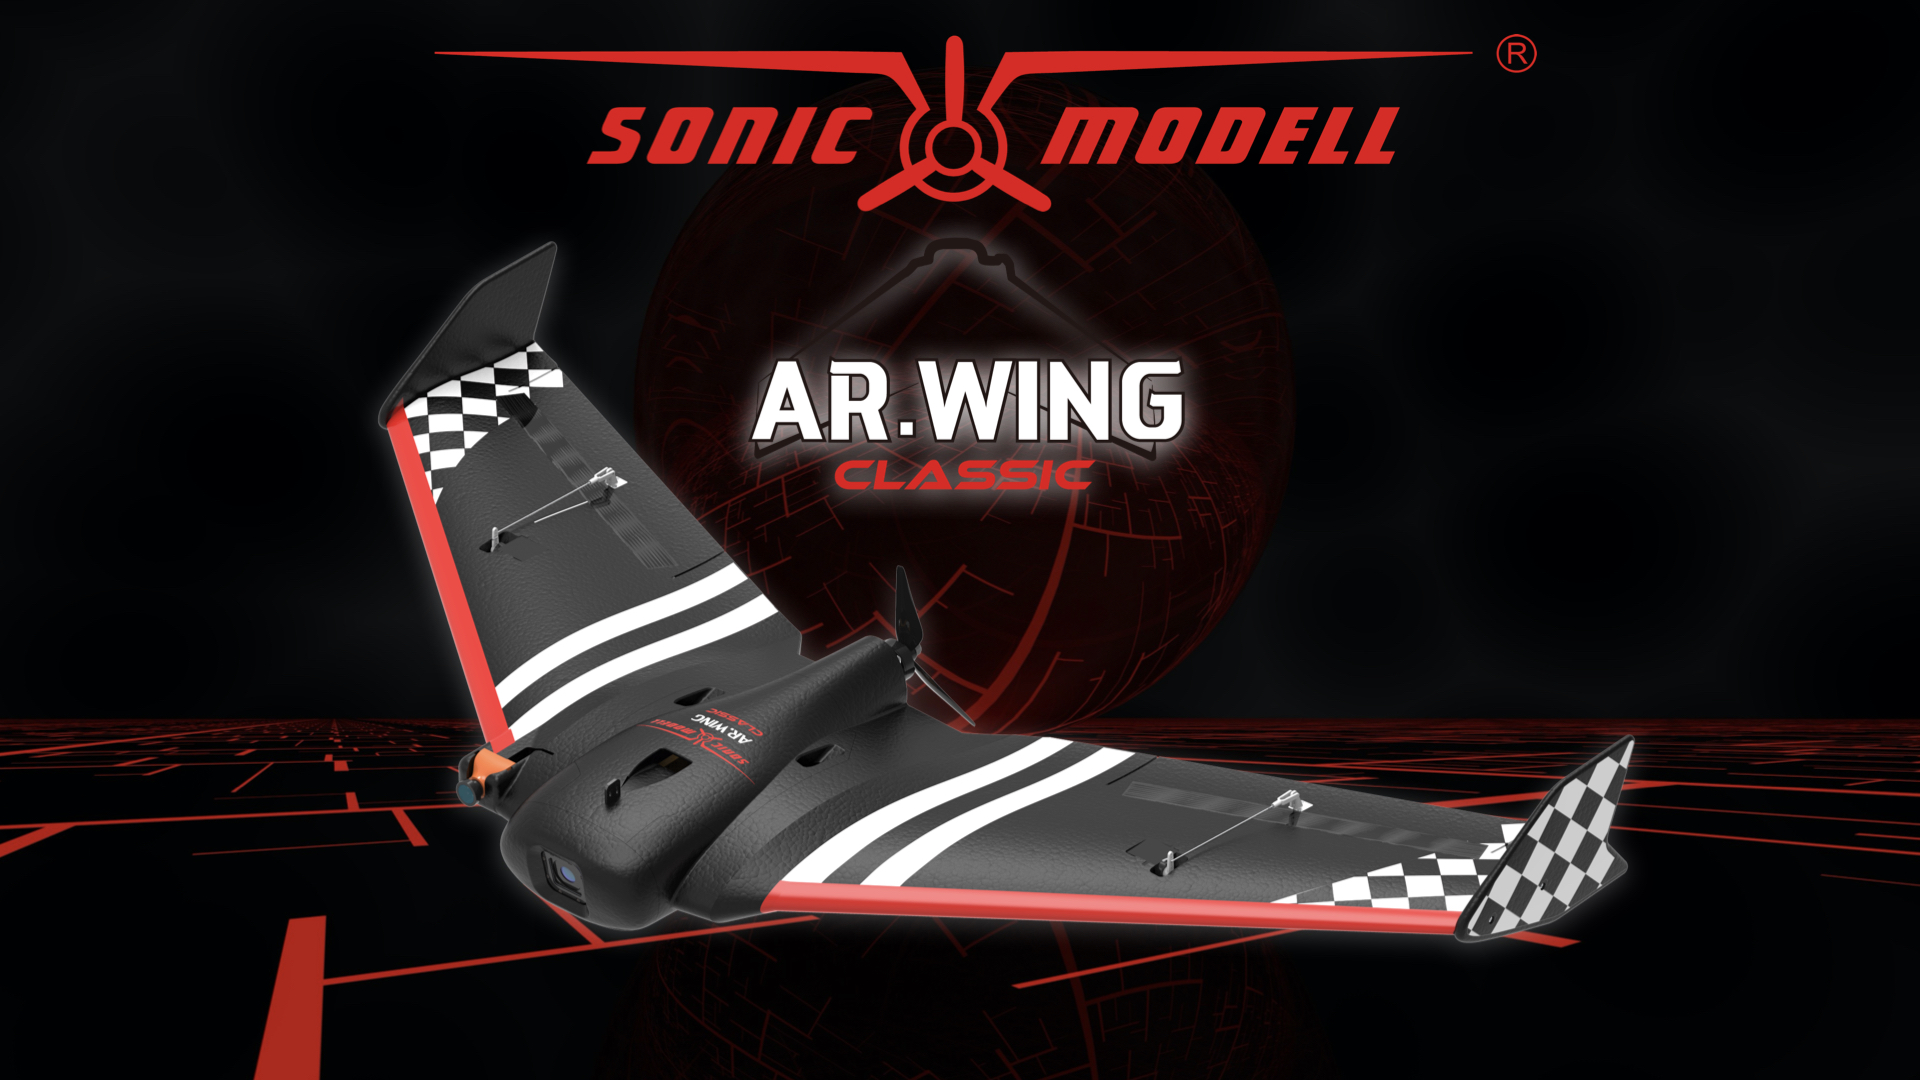 Limited-Supply-Sonicmodell-AR-WING-CLASSIC-900mm-Wingspan-EPP-FPV-Flying-Wing-RC-Airplane-KITPNP-1789234-1